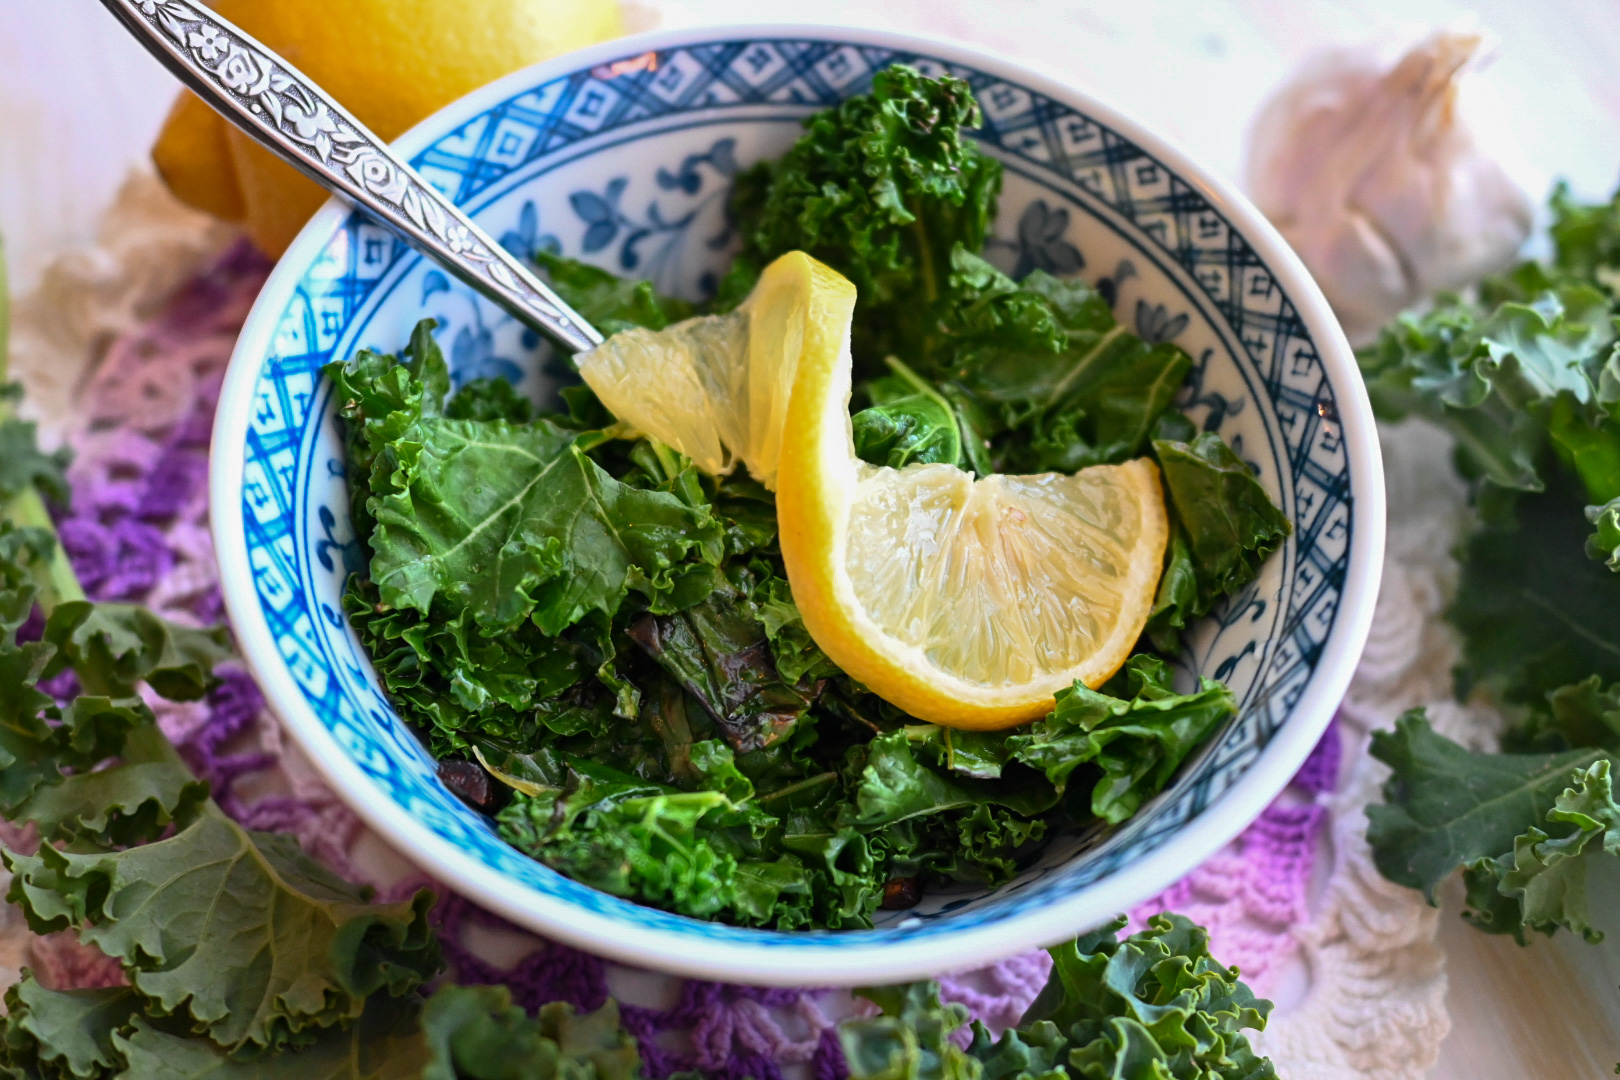 Green curly kale topped with lemon twist in a blue-patterned Japanese ceramic bowl set on purple doily surrounded by a lemon and garlic head.